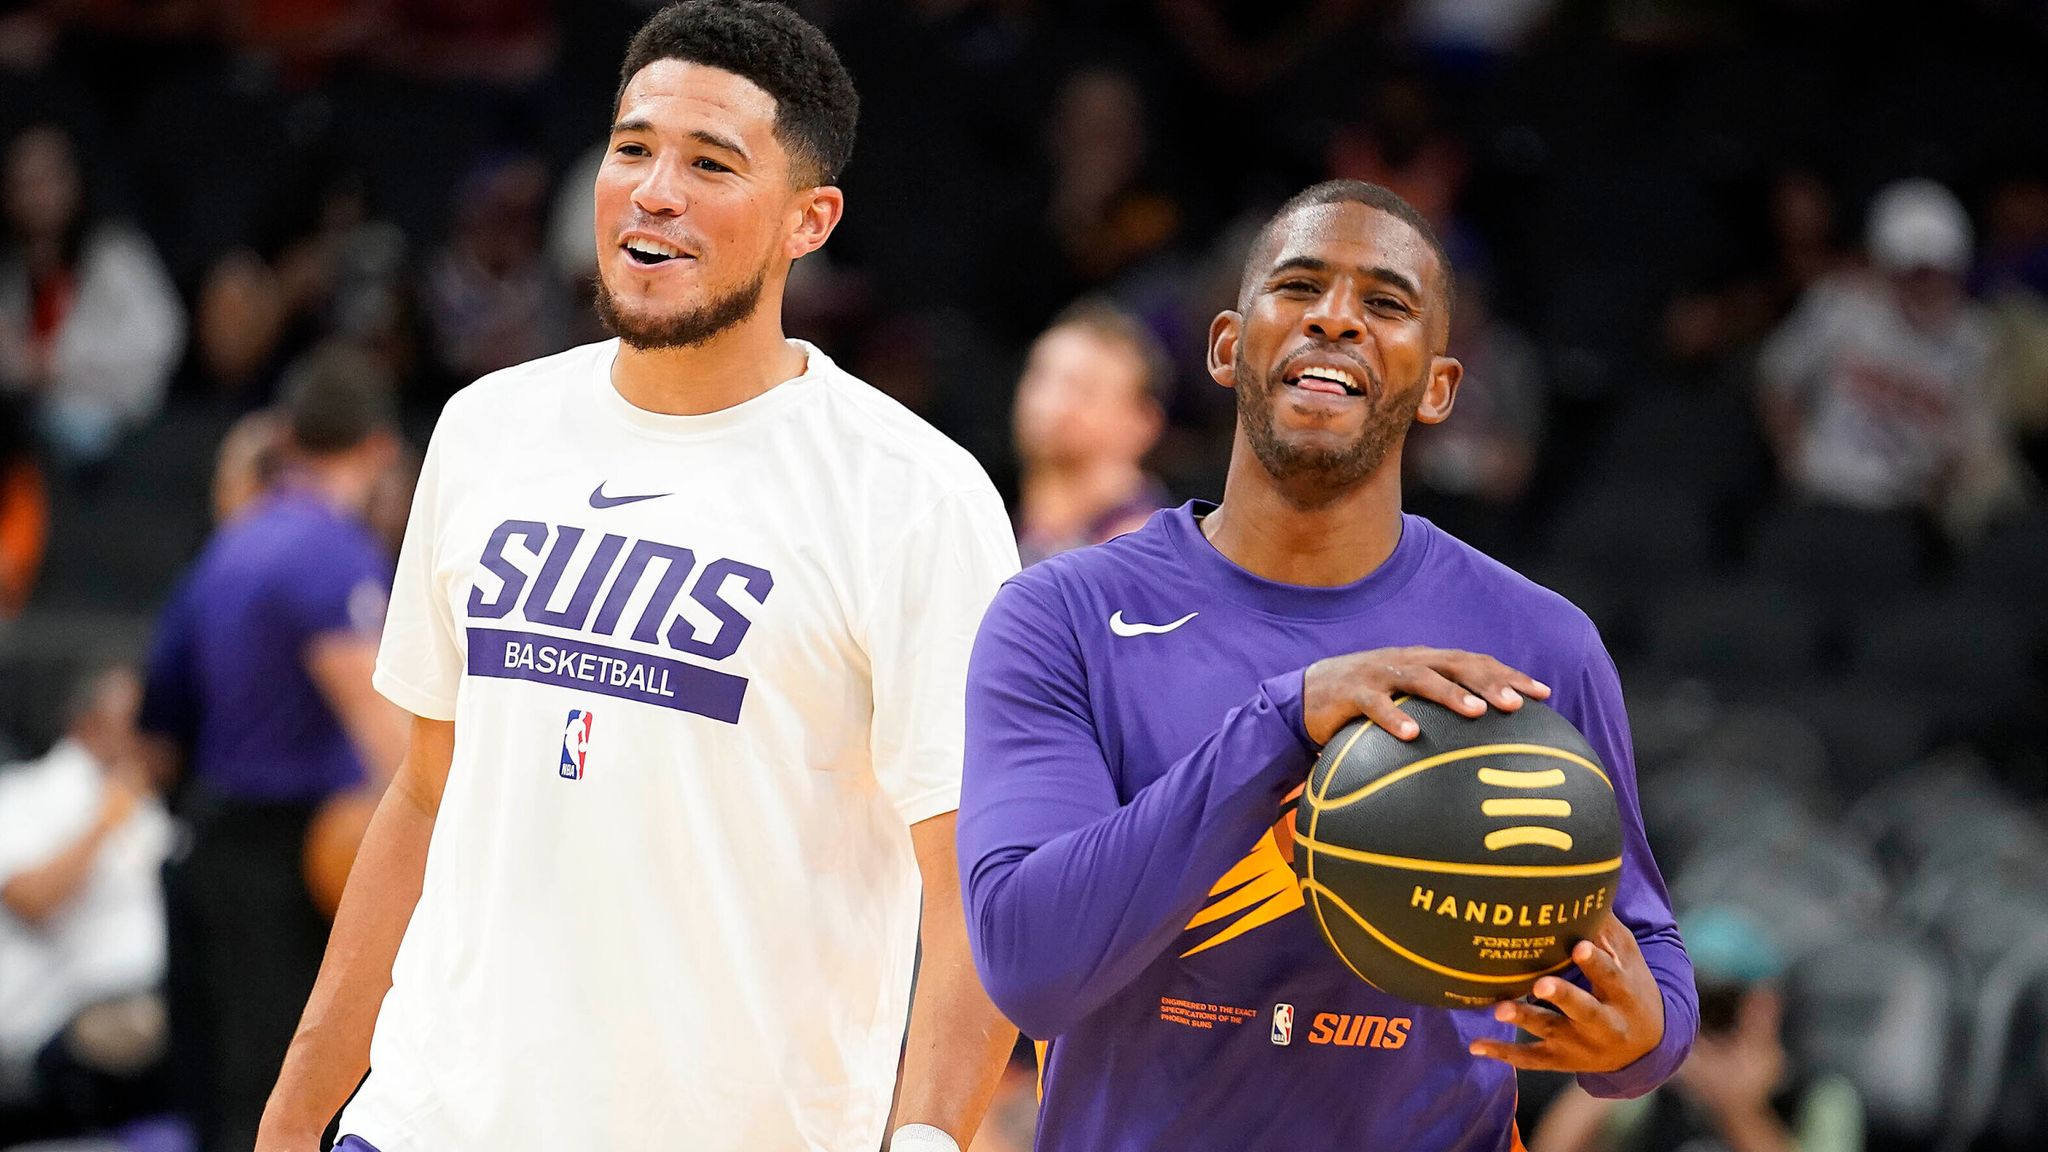 Suns have fun with vulgar shirts worn by Pelicans crowd